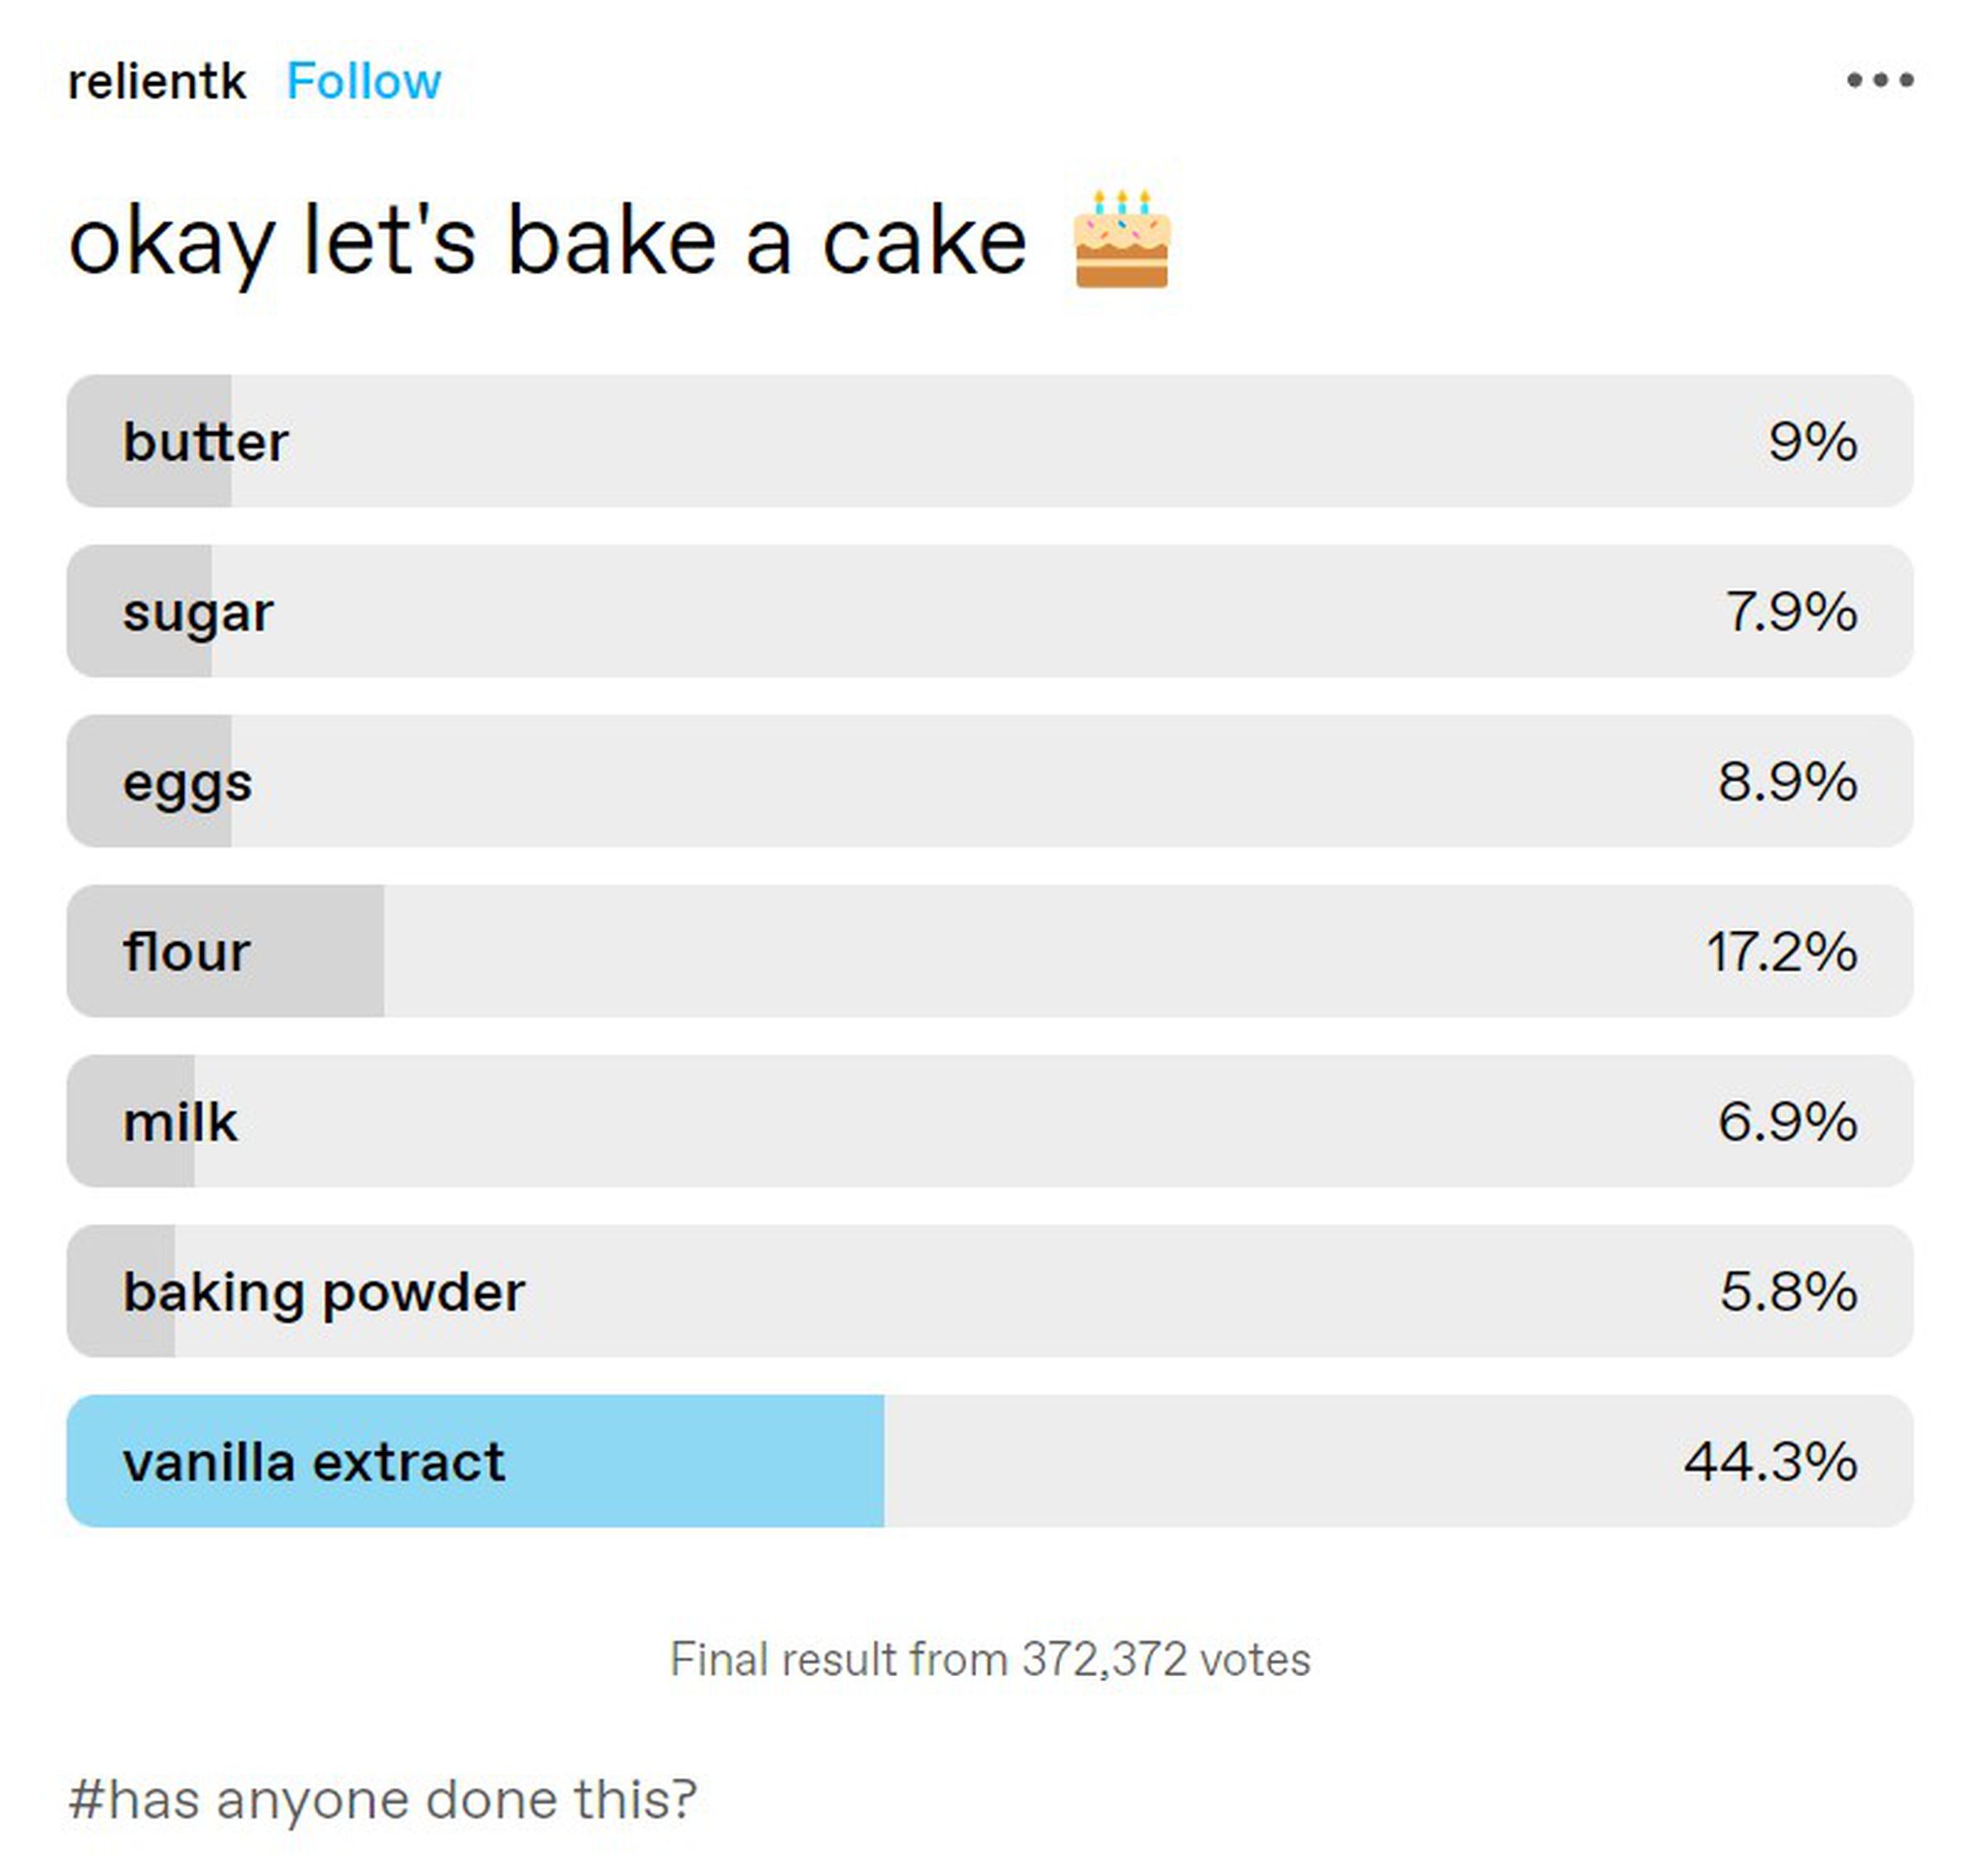 A Tumblr poll displaying cake recipe ingredients, titled “okay let’s bake a cake.” Vanilla extract is comically larger than all other results at 44.3 percent.